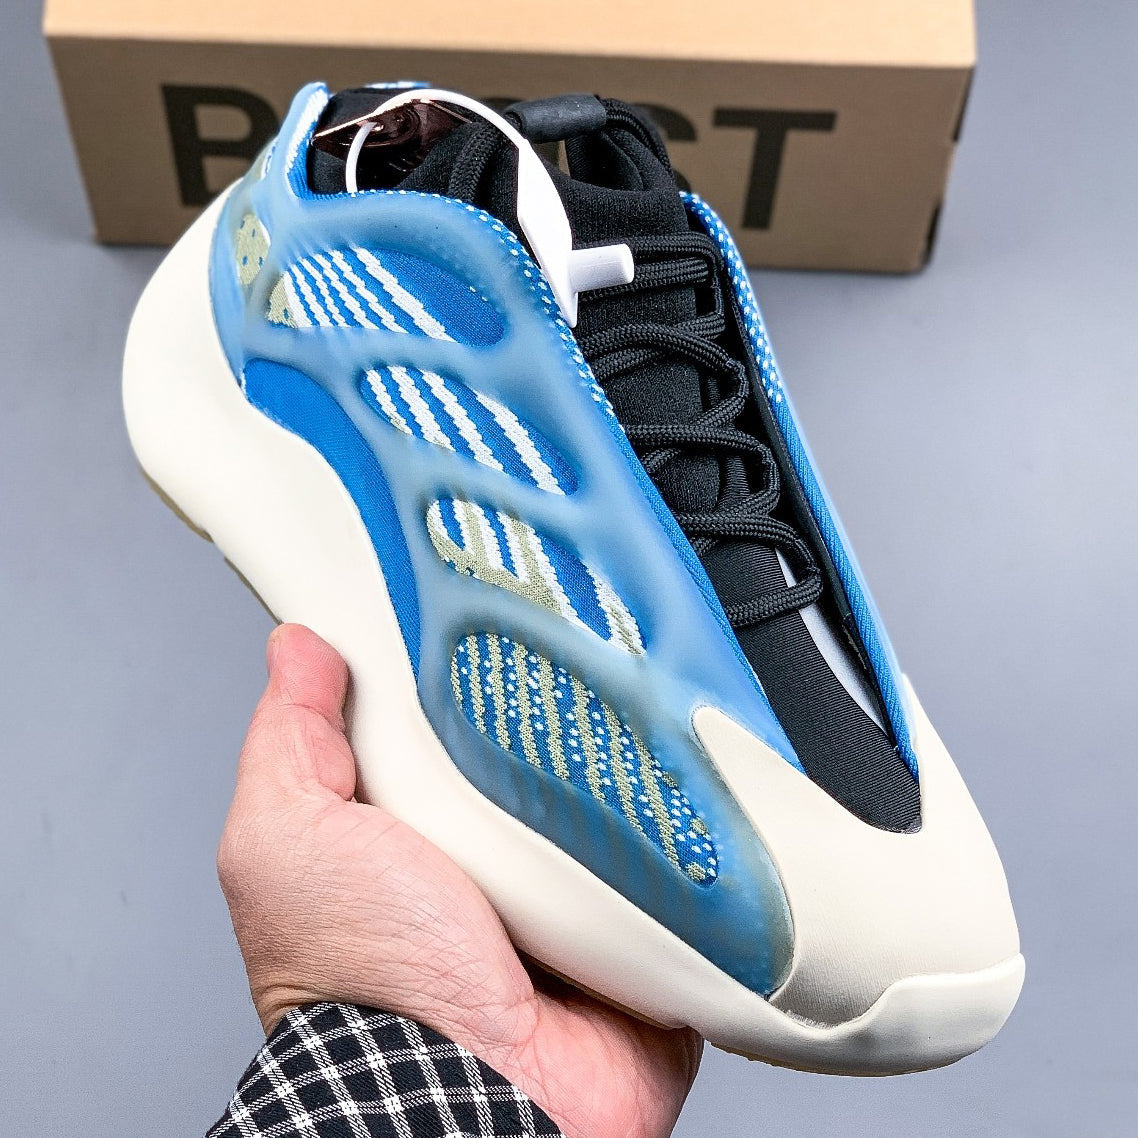 Adidas Yeezy Boost 700 V3 Arzareth Sneakers Shoes from